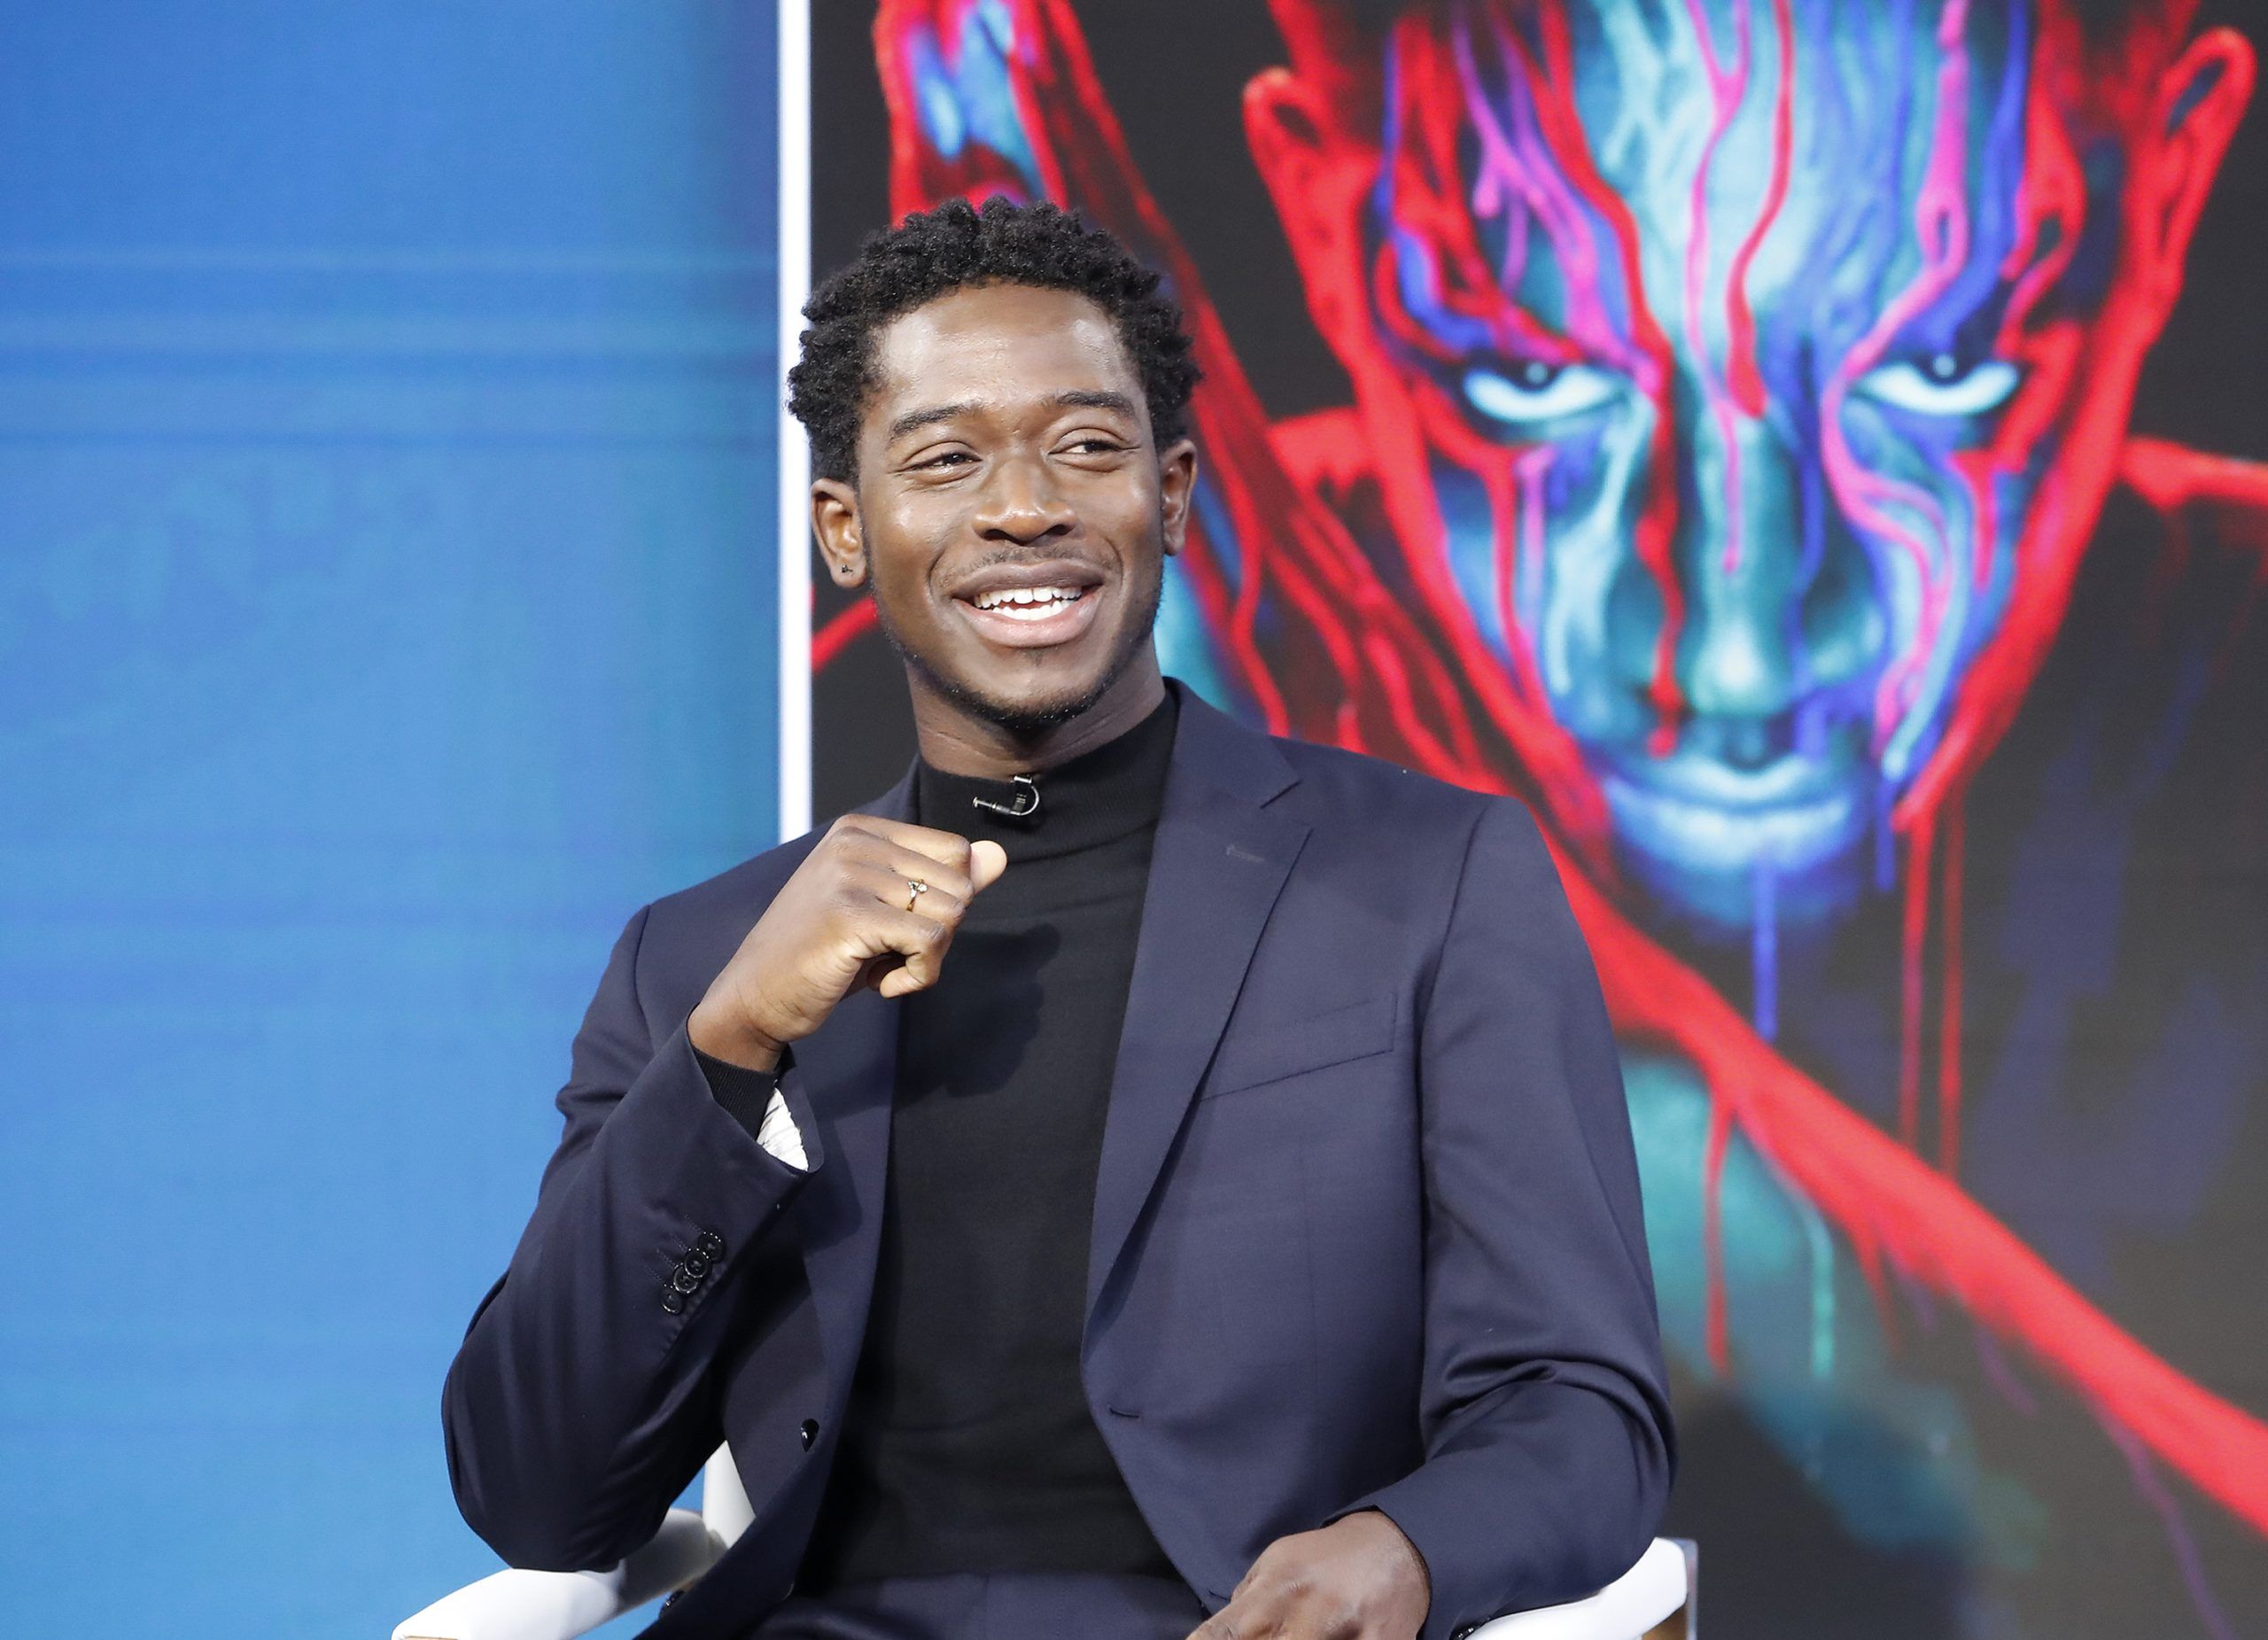 In Case You Missed It: Damson Idris On ‘Good Morning America’